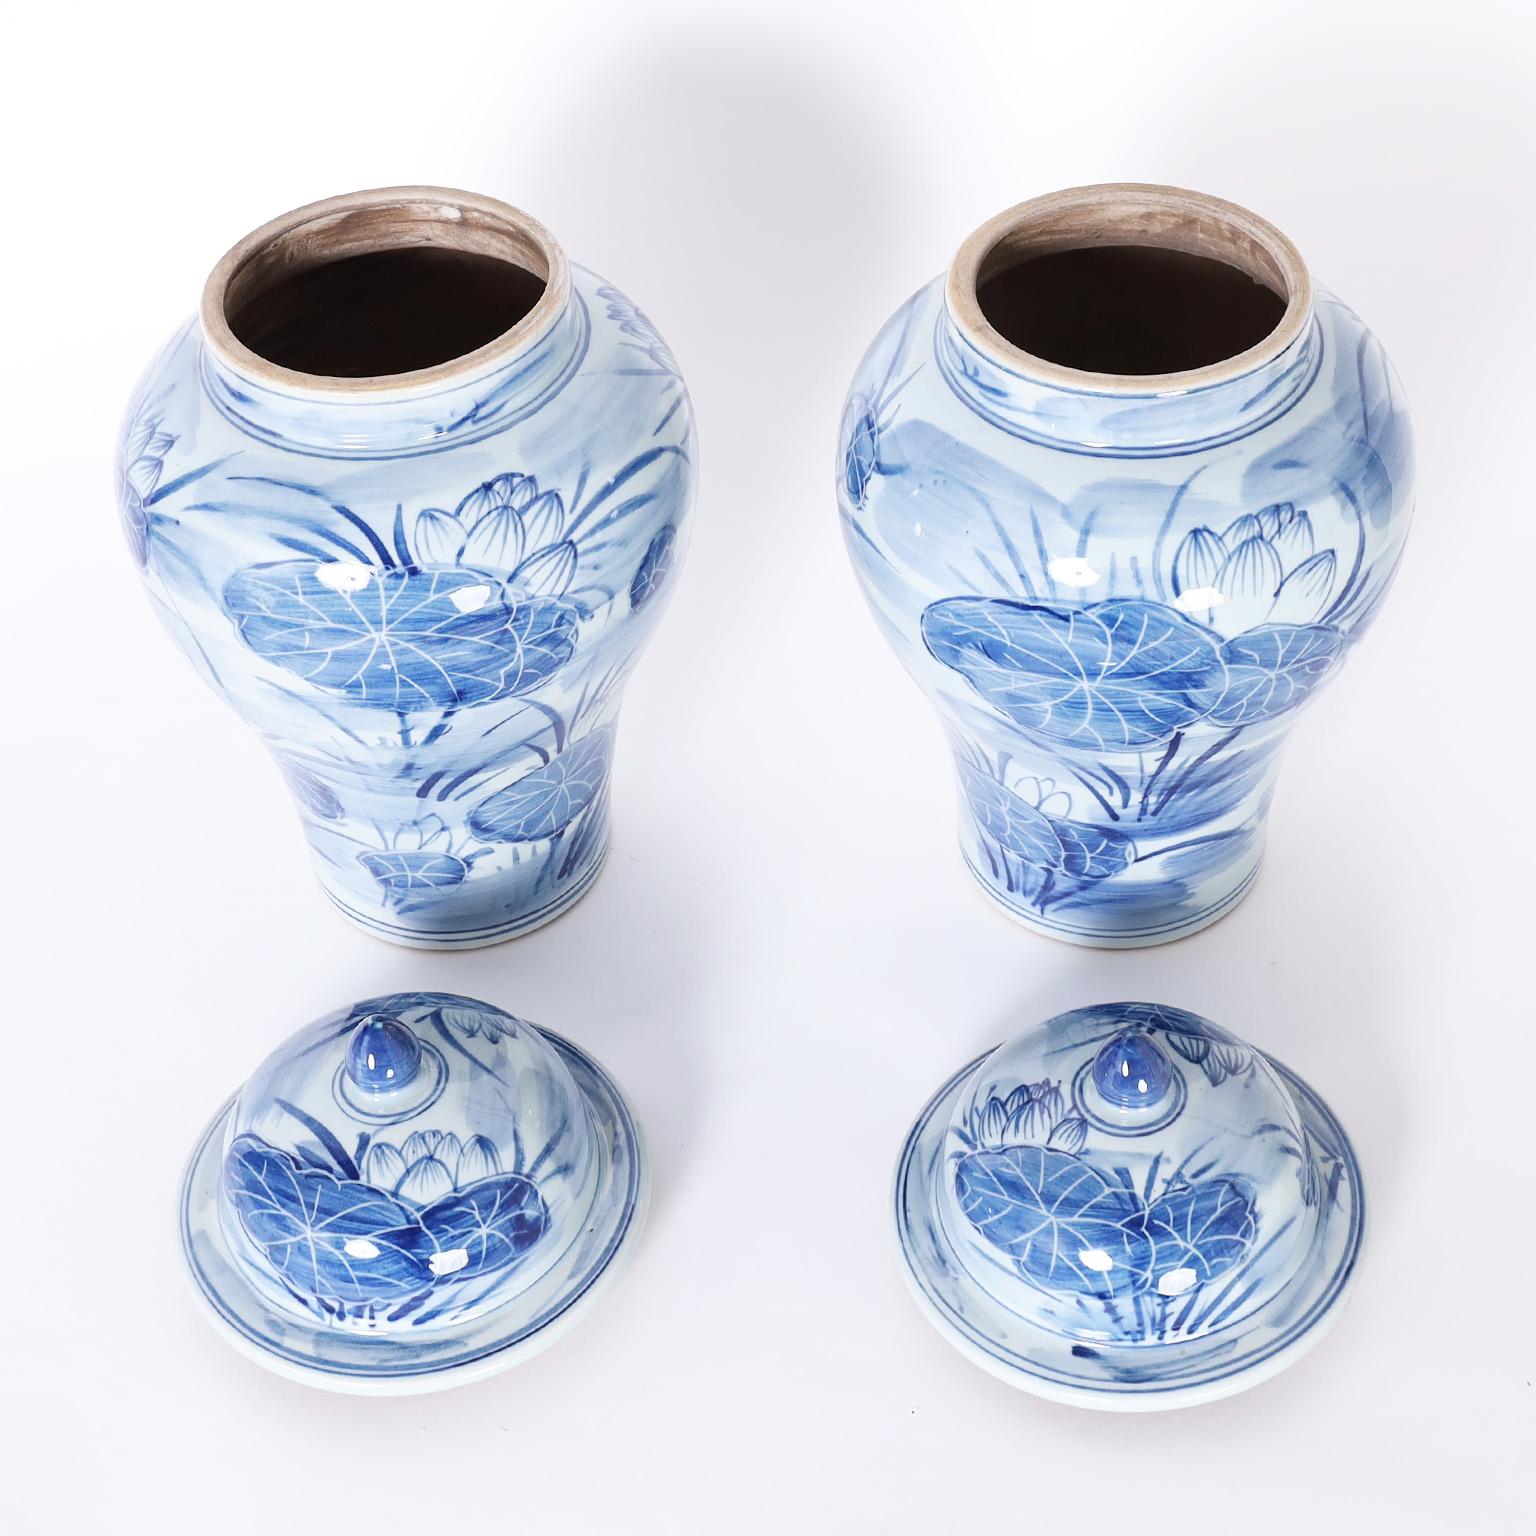 Chinese Export Pair of Blue and White Porcelain Lidded Ginger Jars with Water Lilies